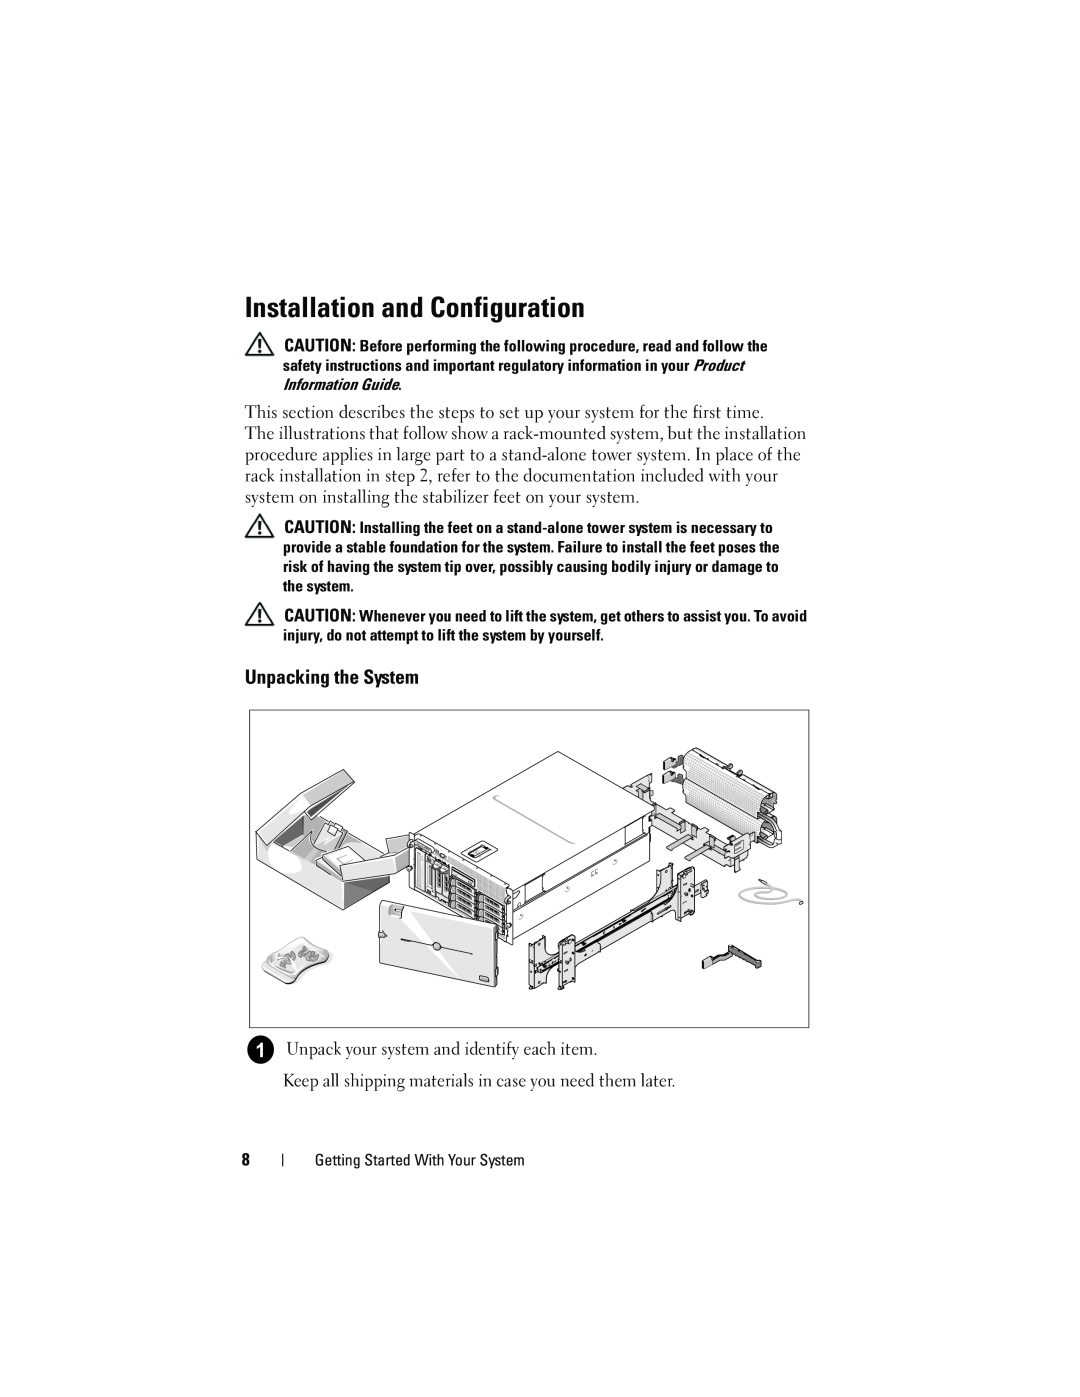 Dell CX193 manual Installation and Configuration, Unpacking the System 